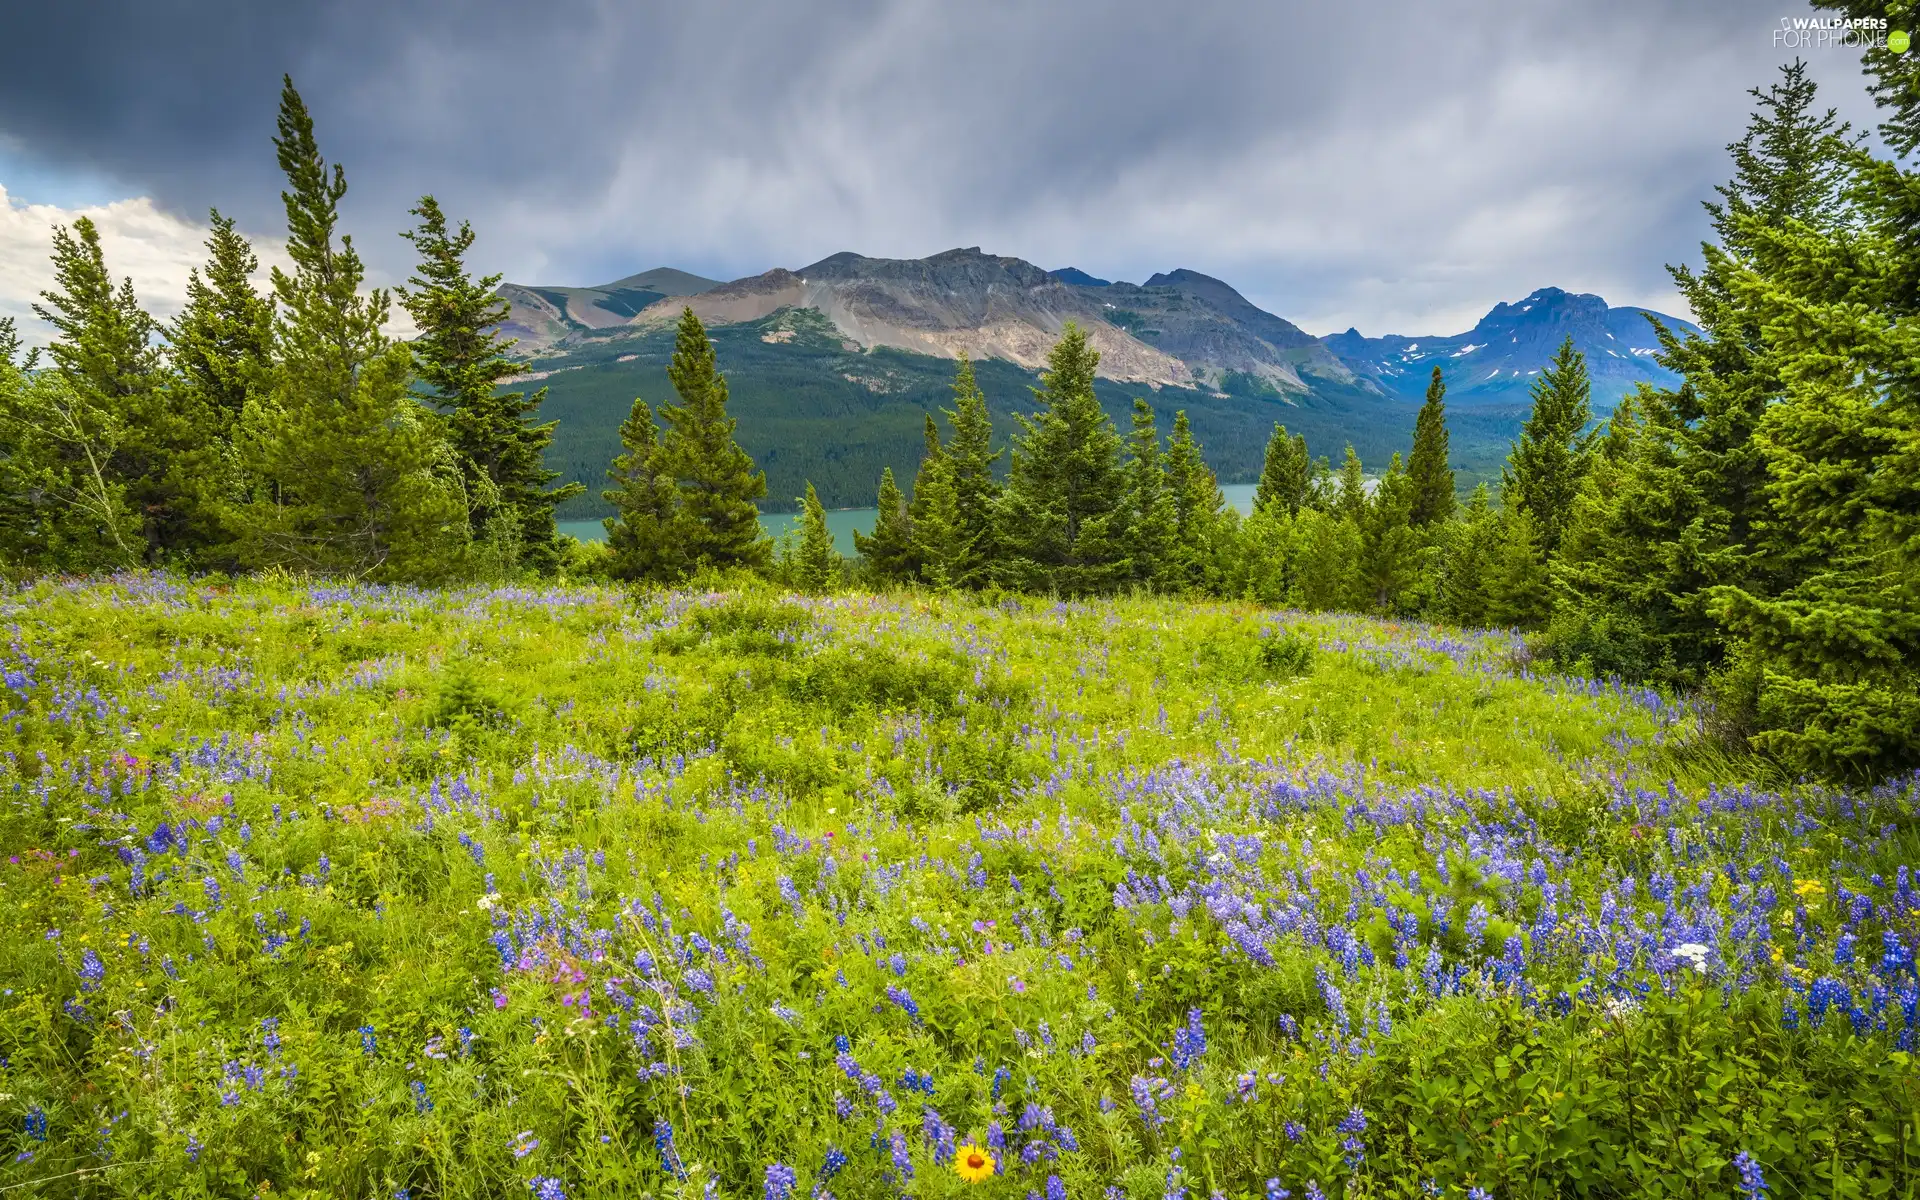 Flowers, Mountains, trees, Montana, viewes, Glacier National Park, Two Medicine Lake, The United States, lupine, Meadow